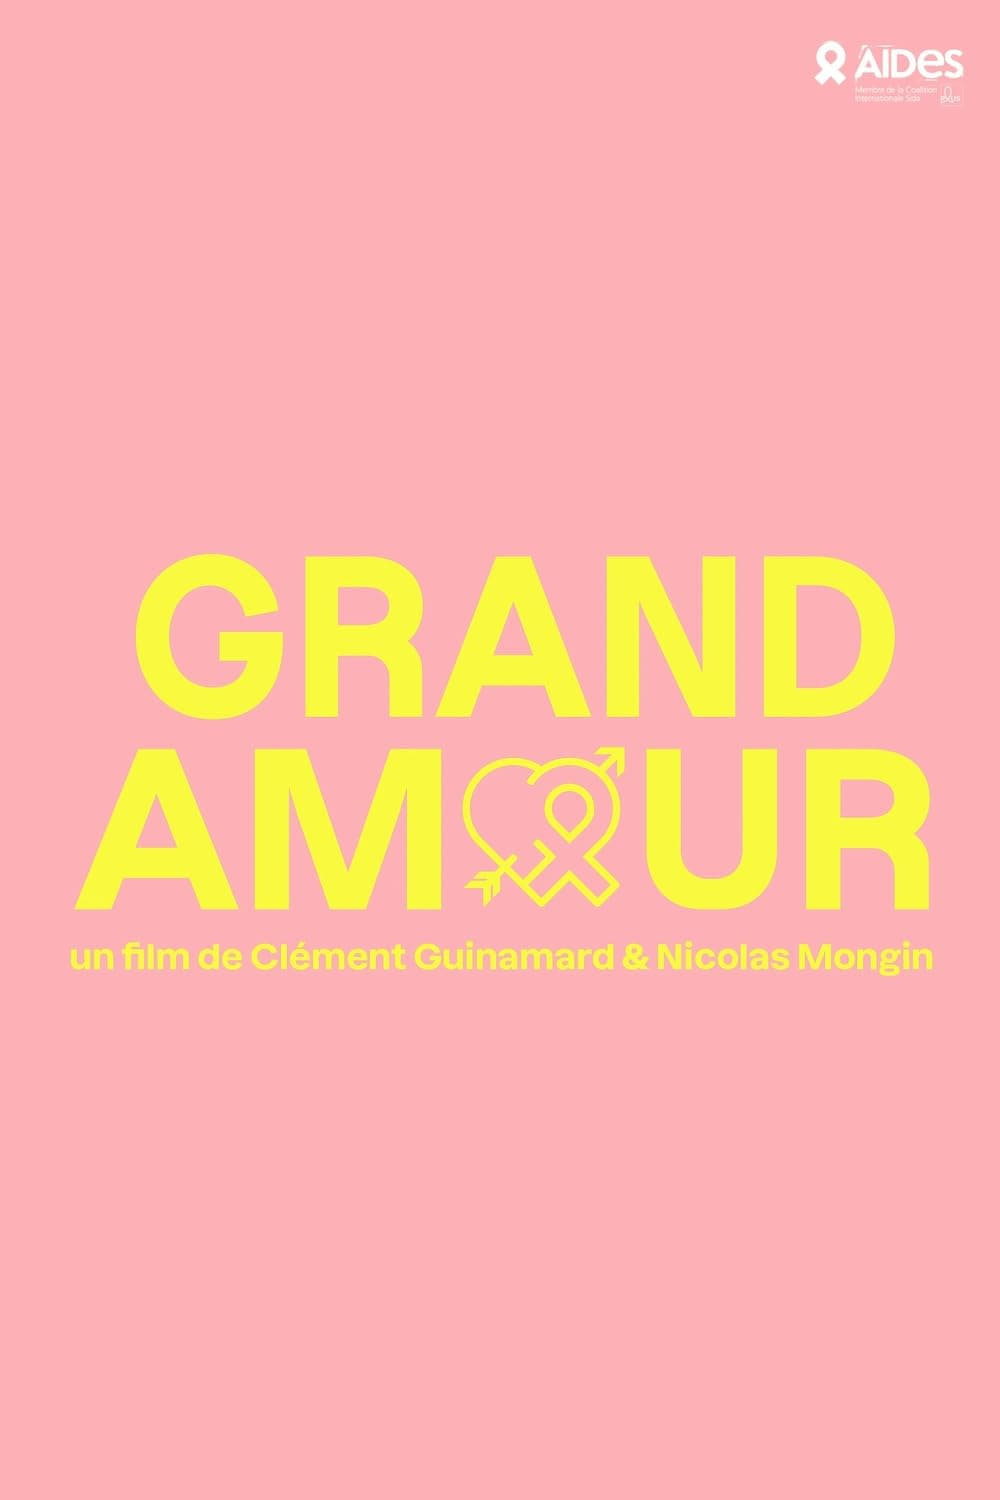 Grand amour